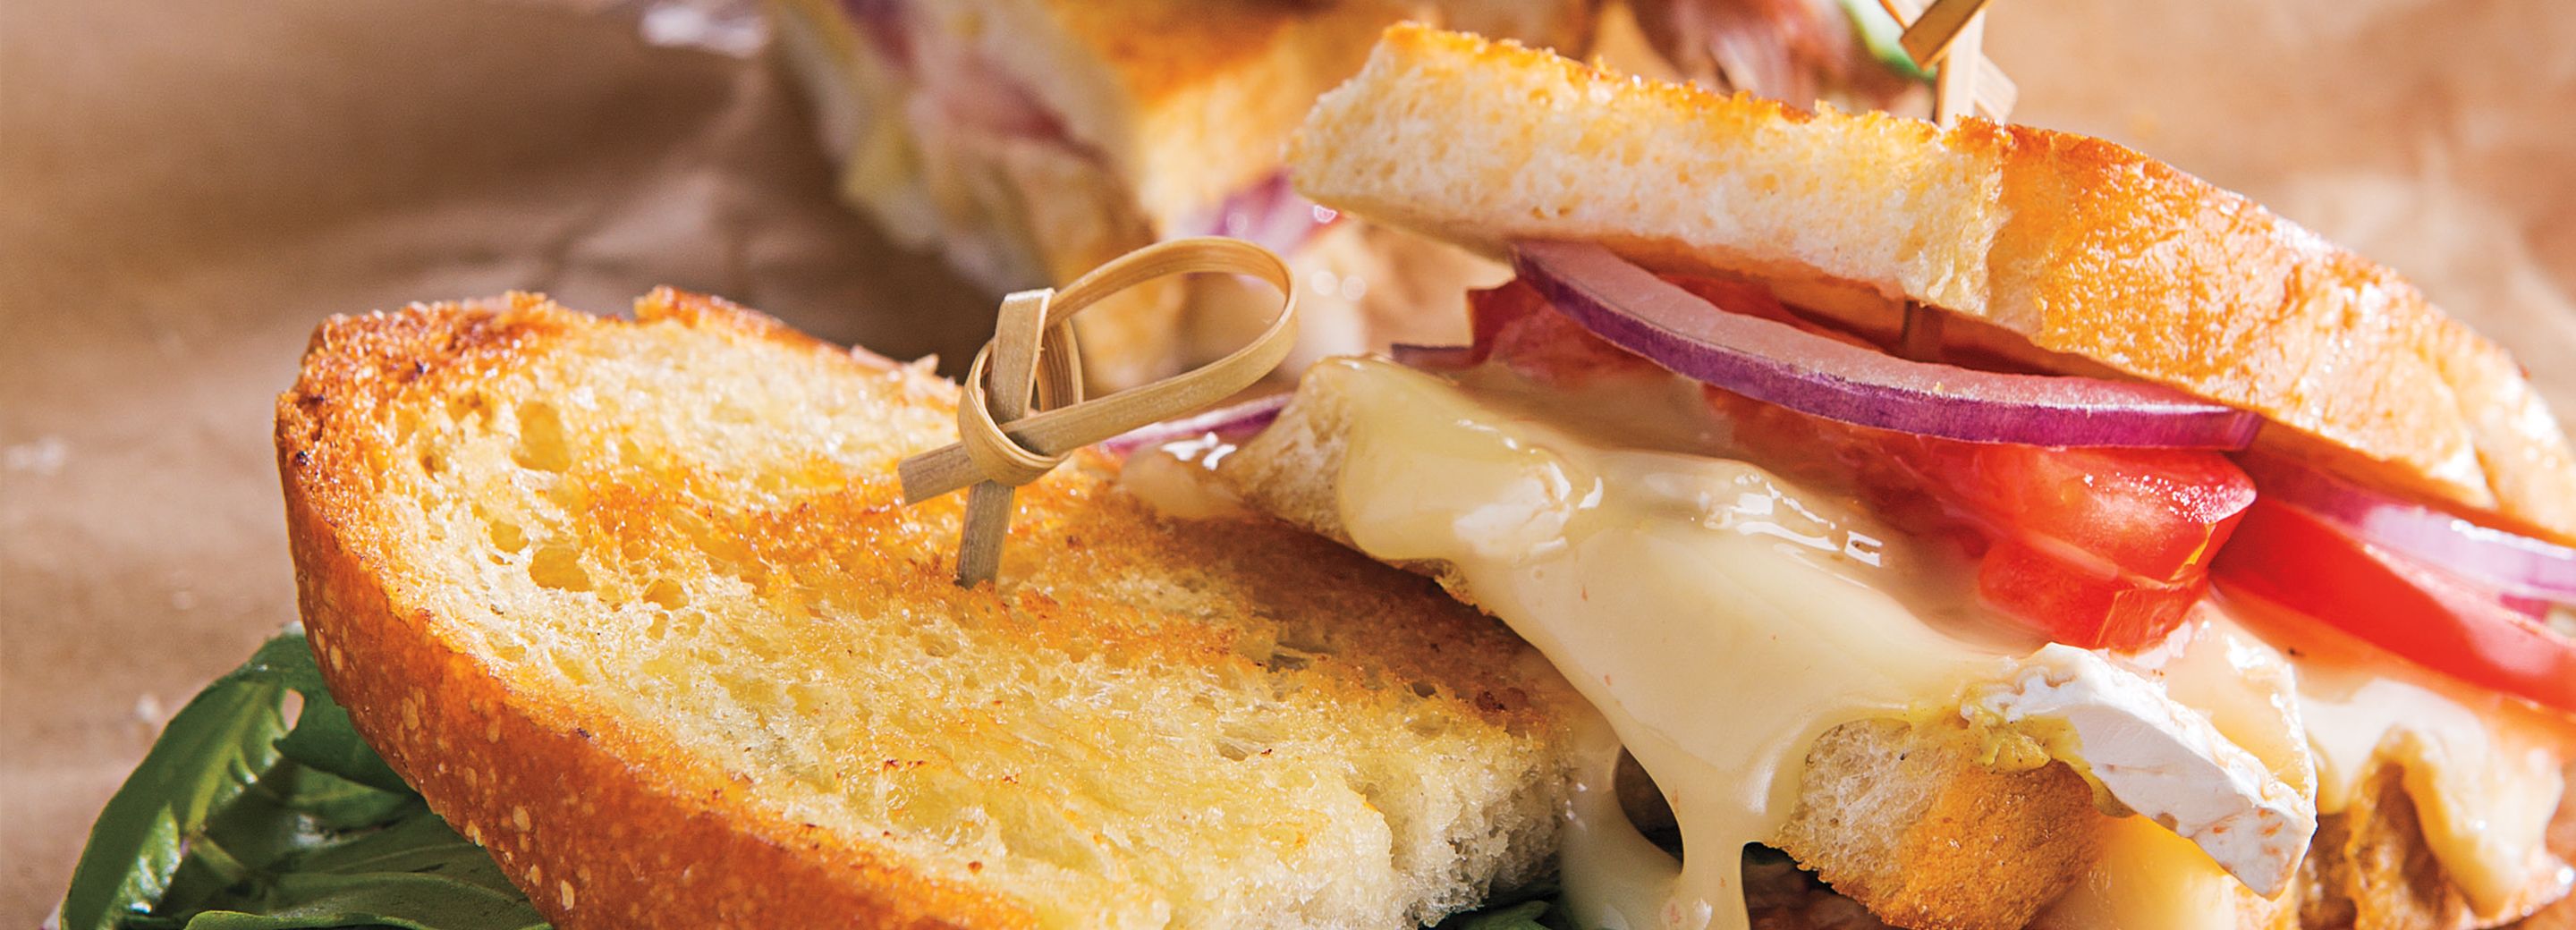 Brie, Red Onion & Tomato Grilled Cheese